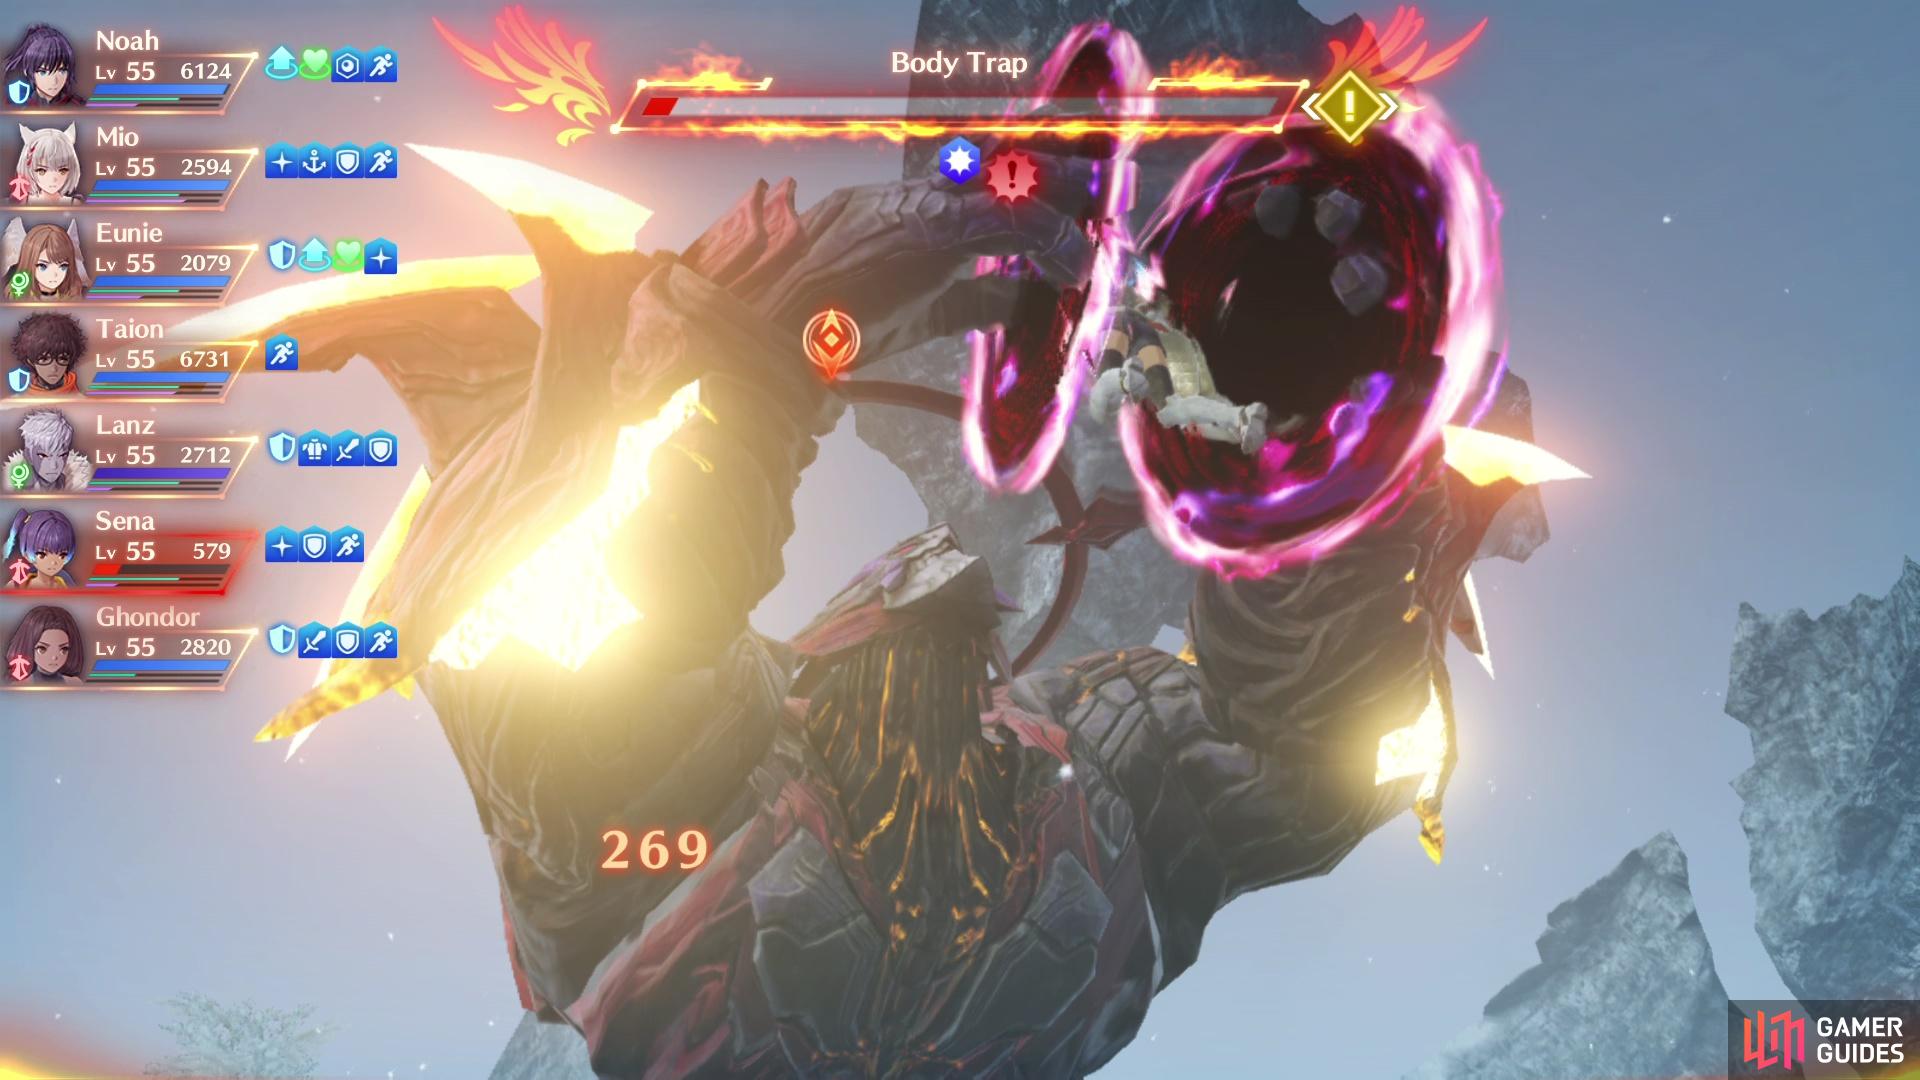 Body Trap disables a character and deals heavy damage